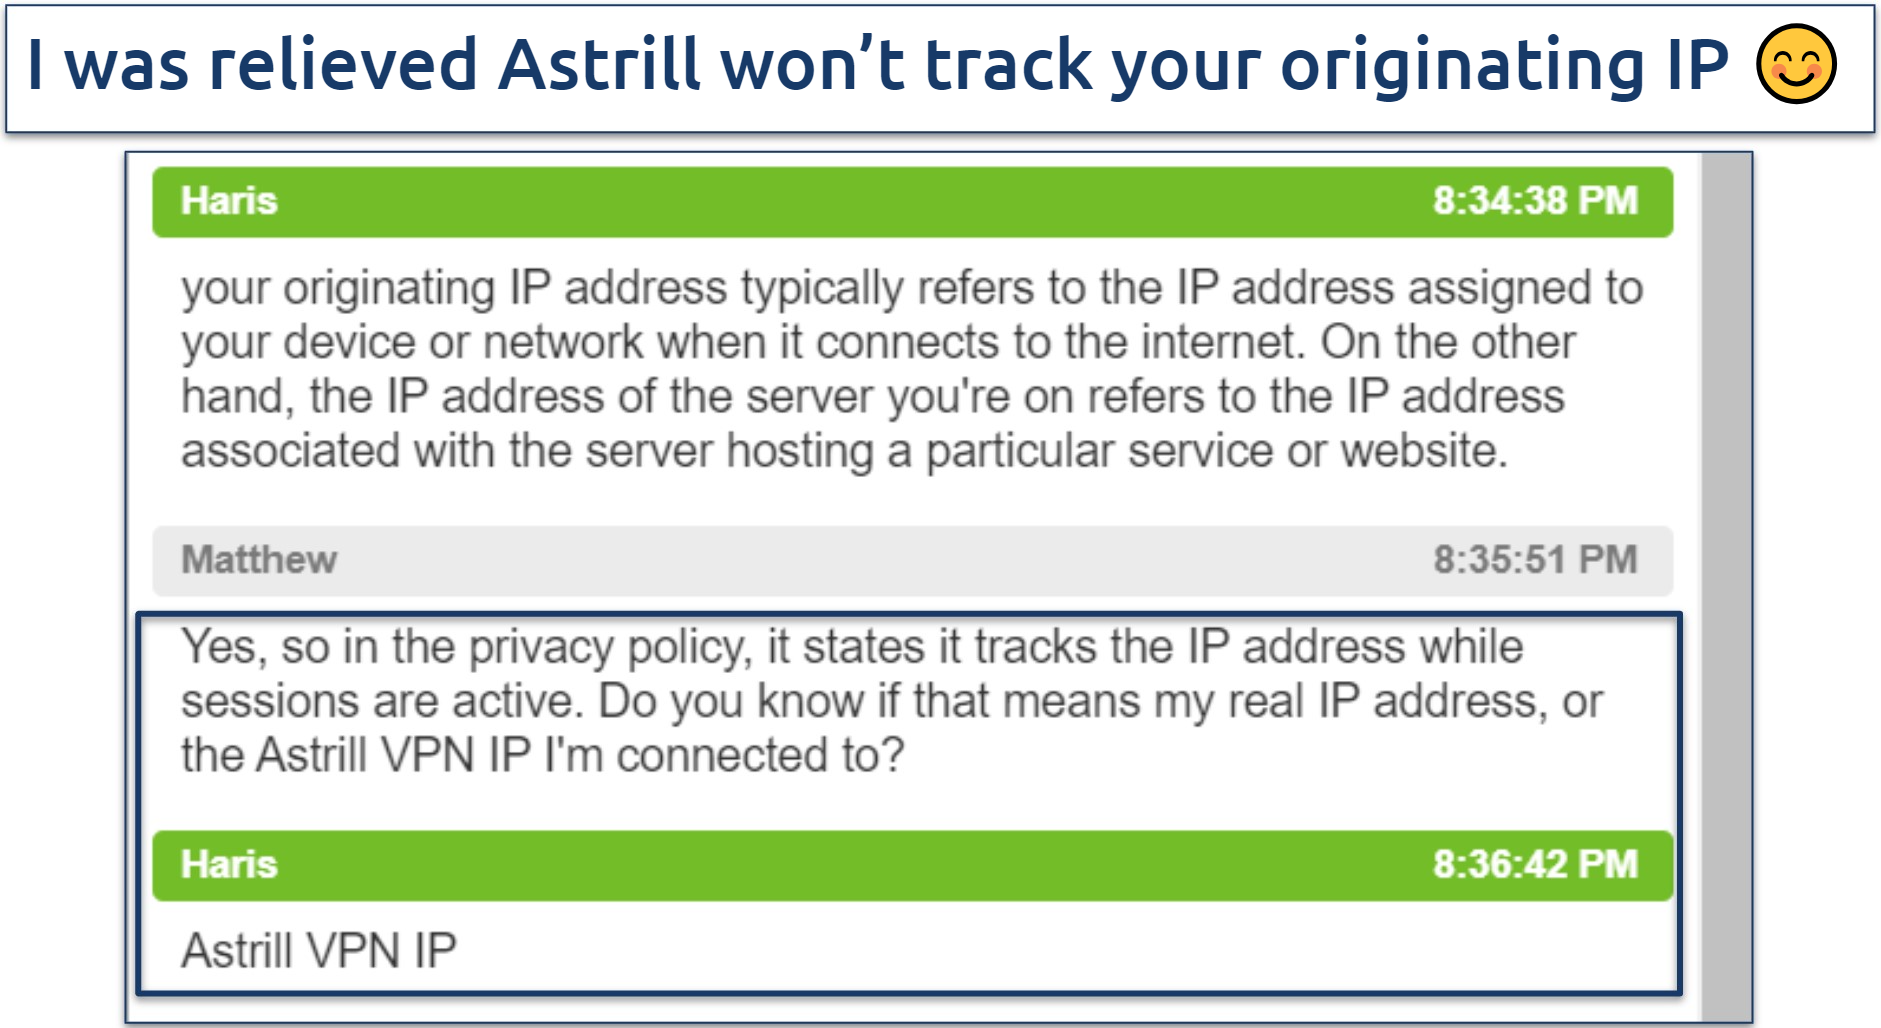 Screenshot of a conversation with Astrill VPN support where they state it only tracks the VPN's IP during active sessions 